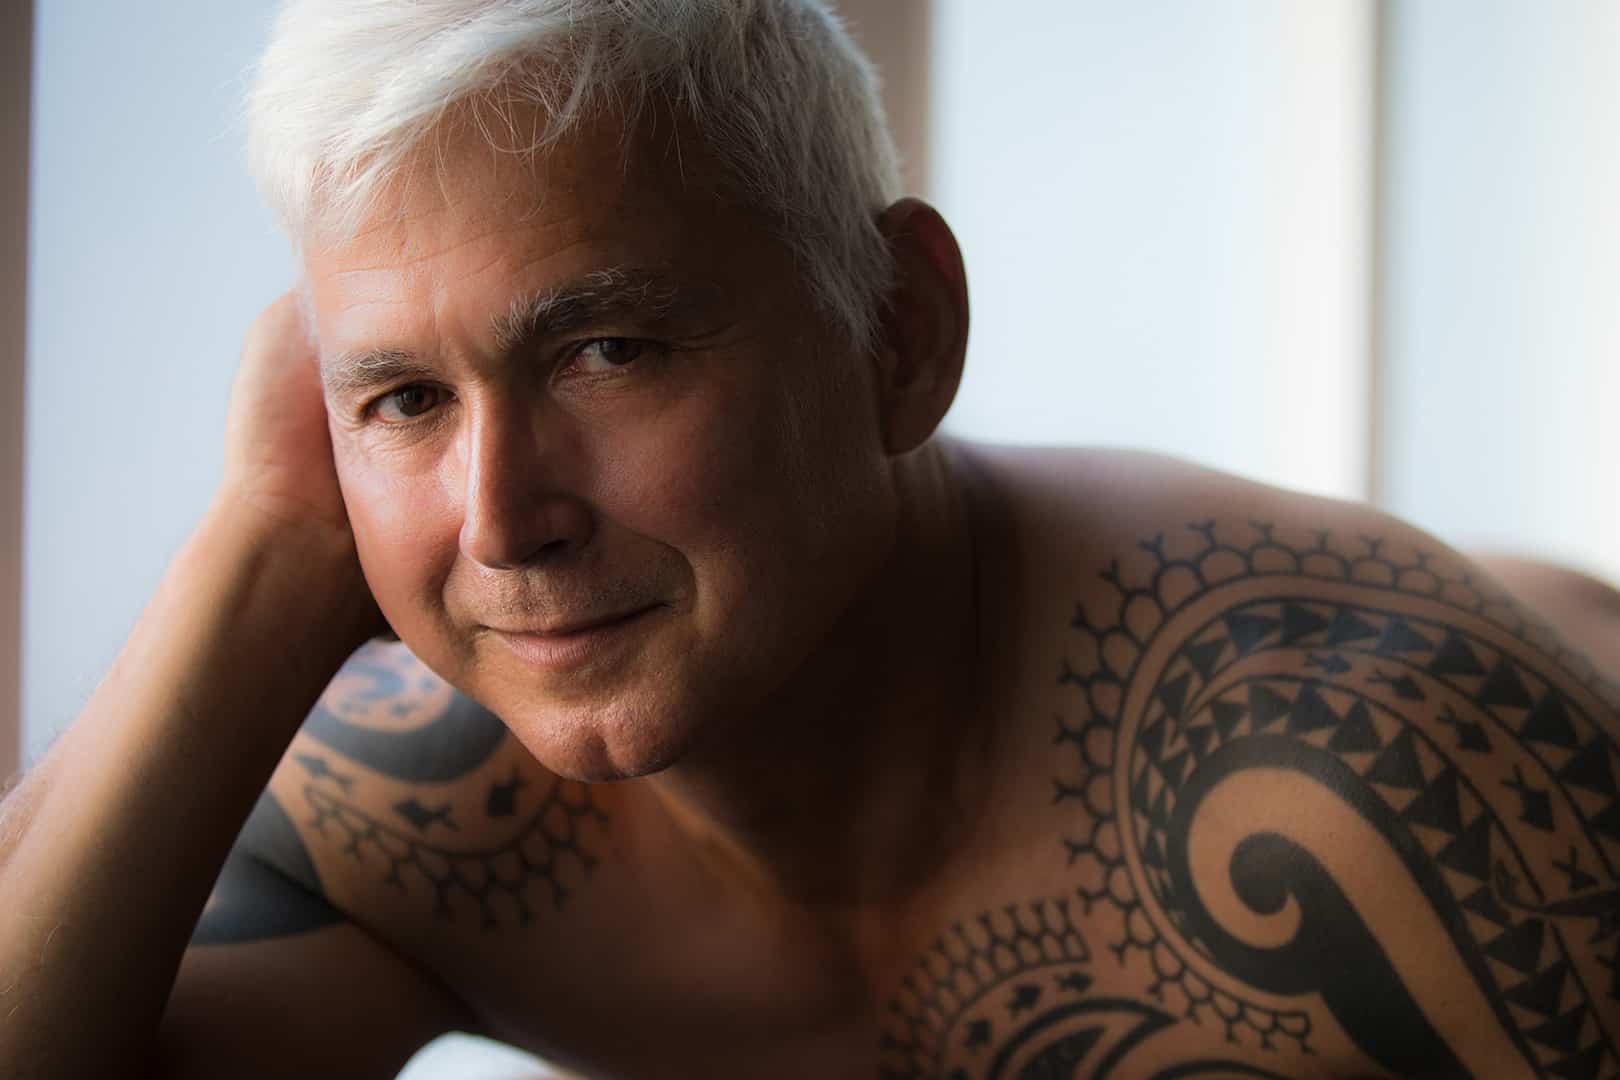 boudoir image of tattooed man smiling at the camera